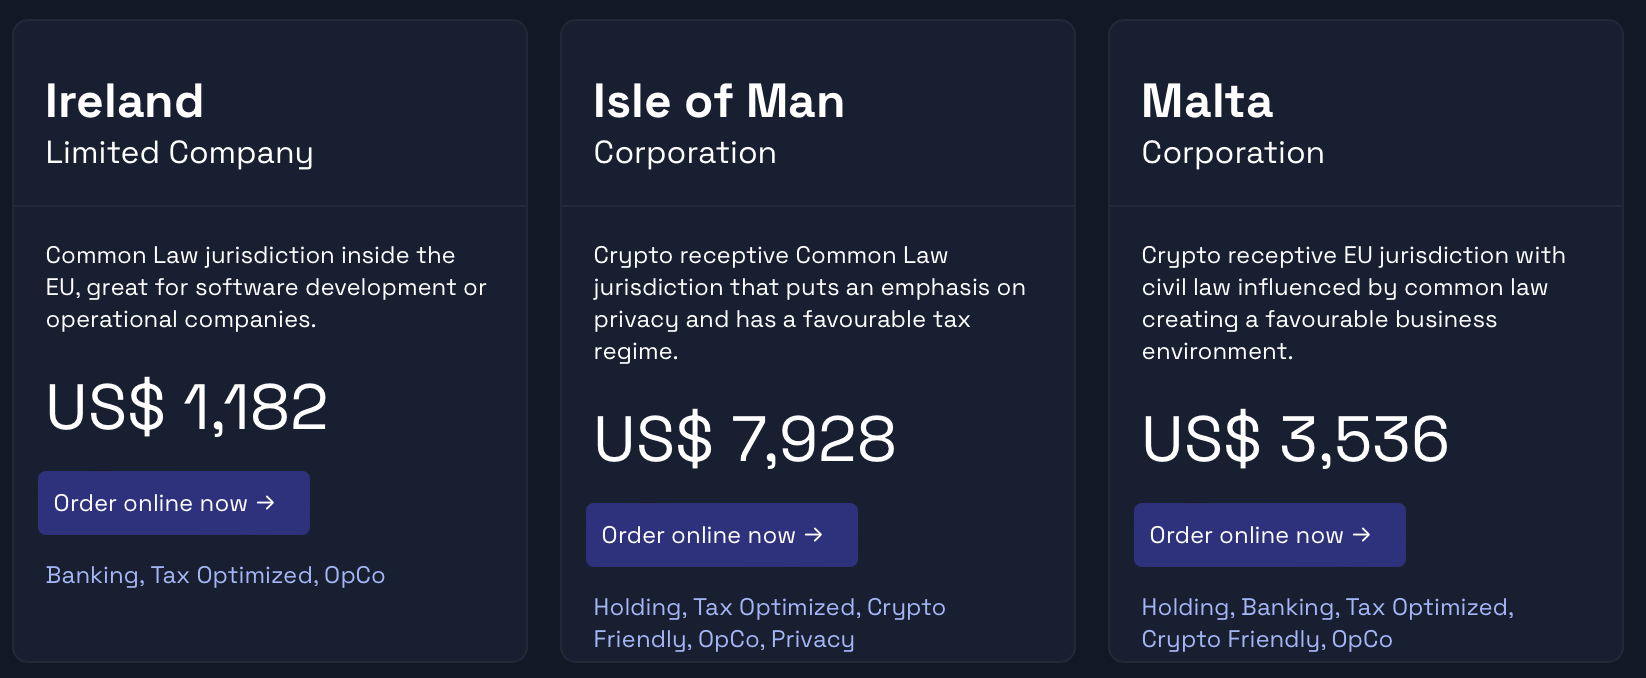 New entities à la carte: We added Ireland, Isle of Man and Malta for online order on otonomos.com